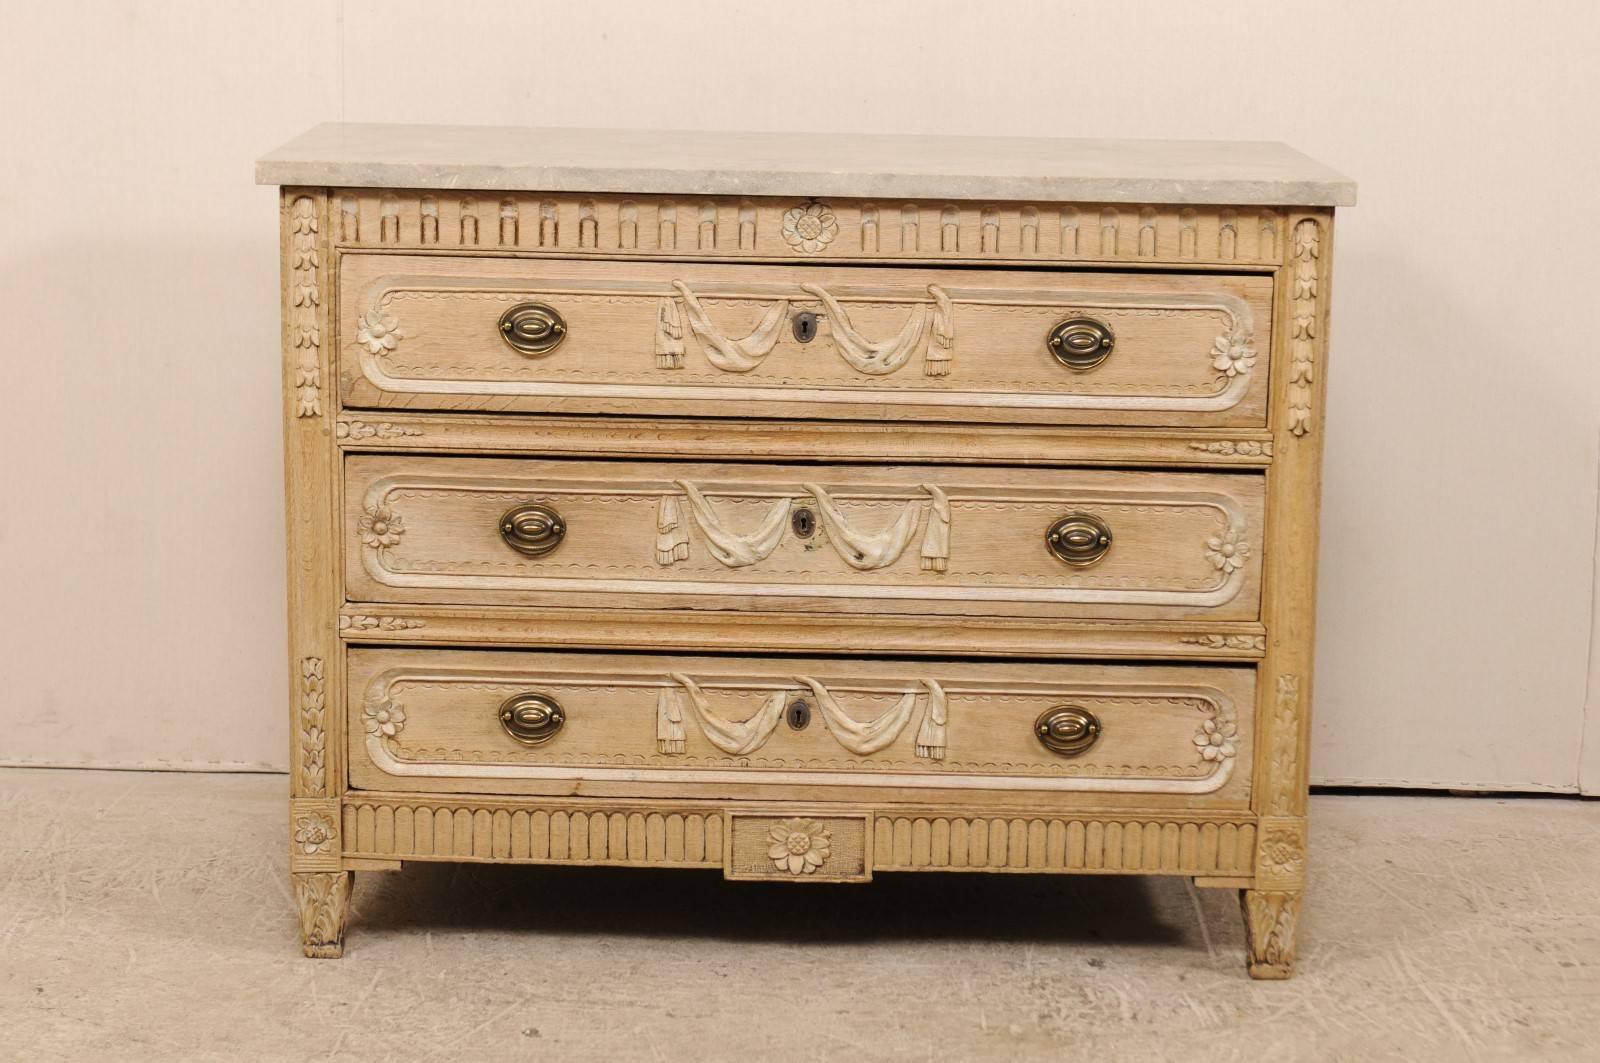 A French, early 19th century carved wood chest with a fossilized and honed marble top. This antique oakwood chest of three drawers features beautifully carved motifs of swagged ribbons falling gently about the center of the drawer fronts, just over